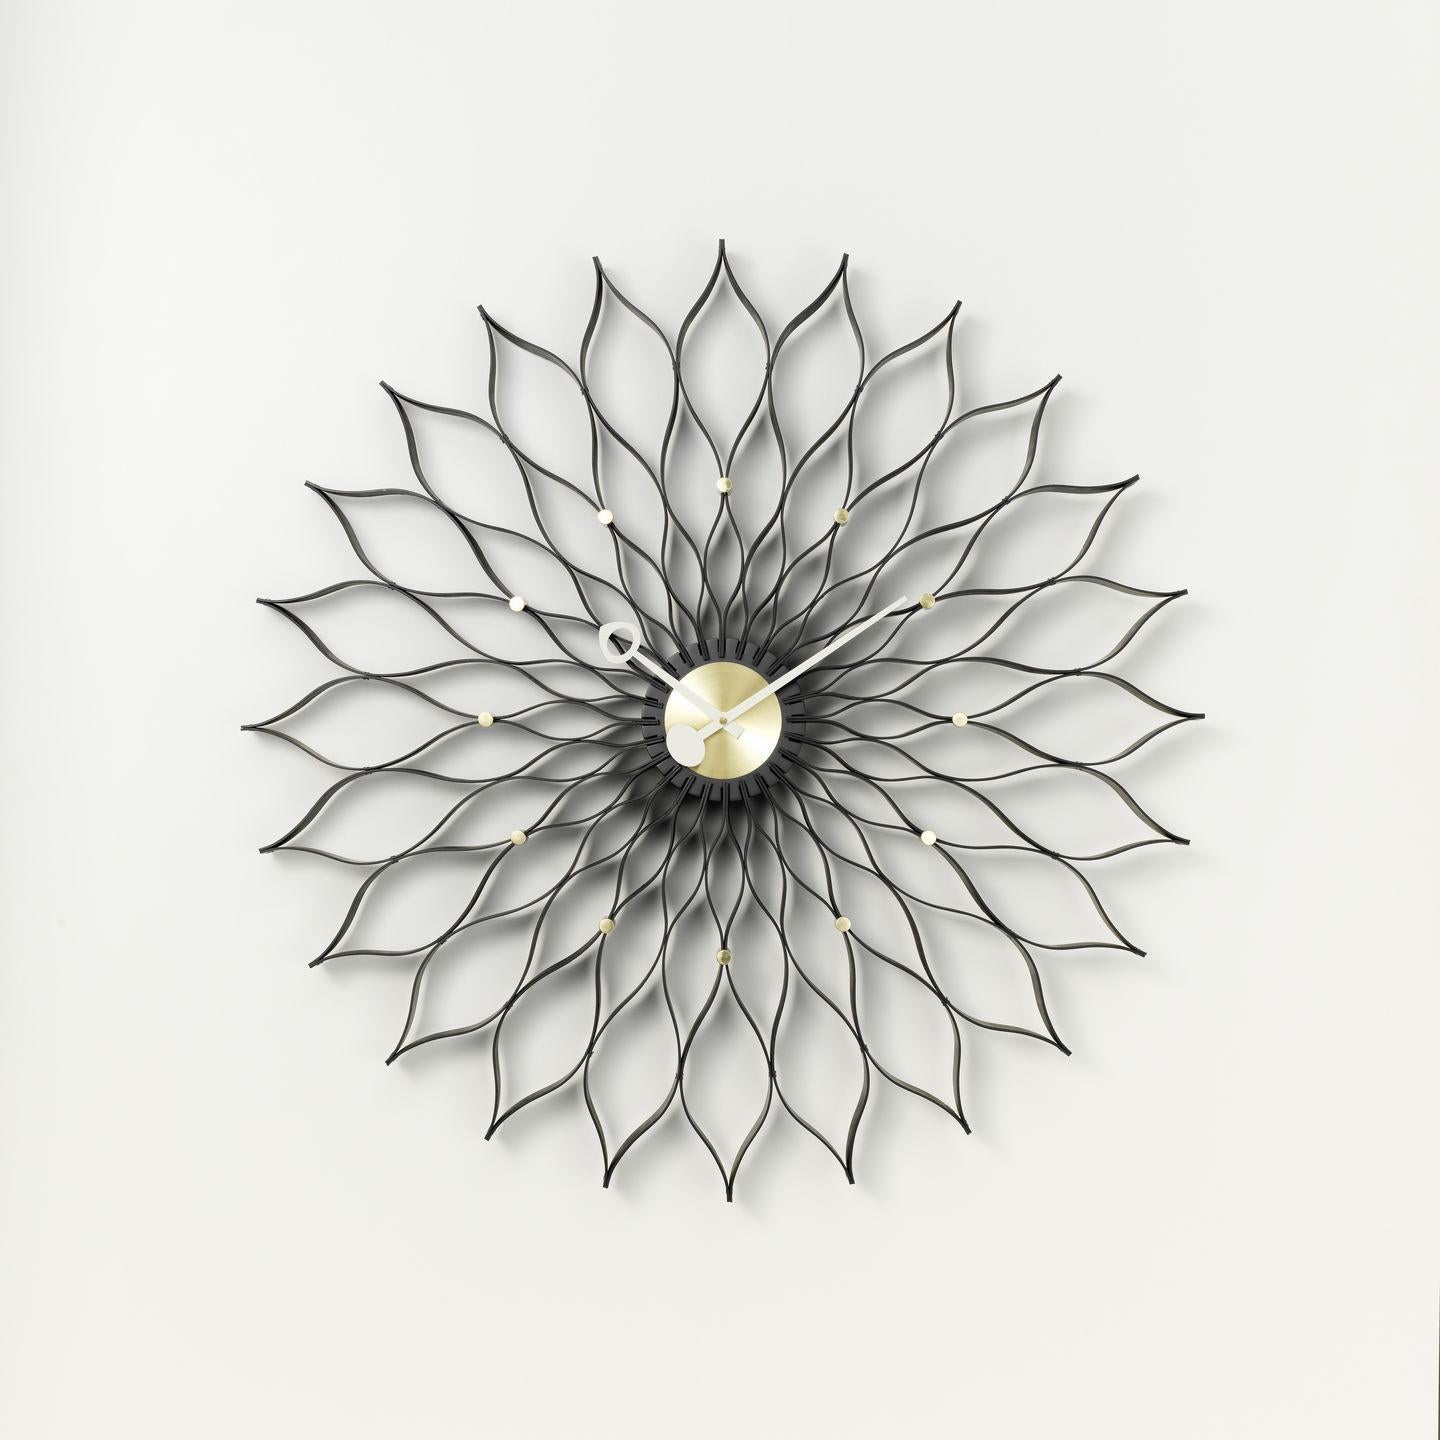 Mid-Century Modern George Nelson Sunflower Wall Clock, Wood and Metal by Vitra